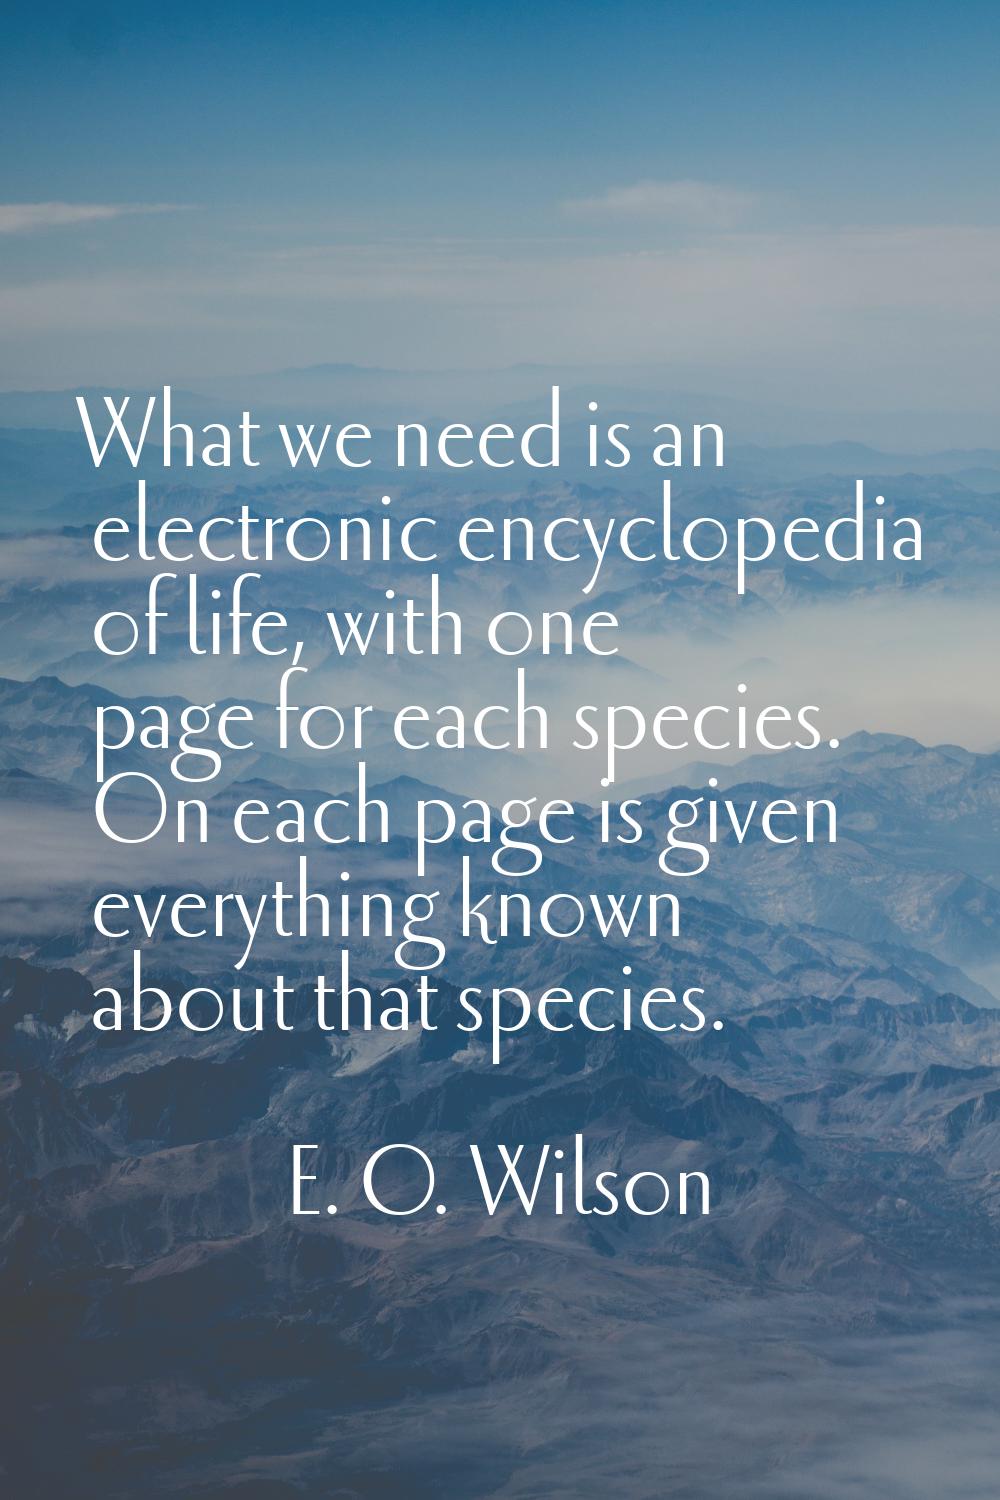 What we need is an electronic encyclopedia of life, with one page for each species. On each page is